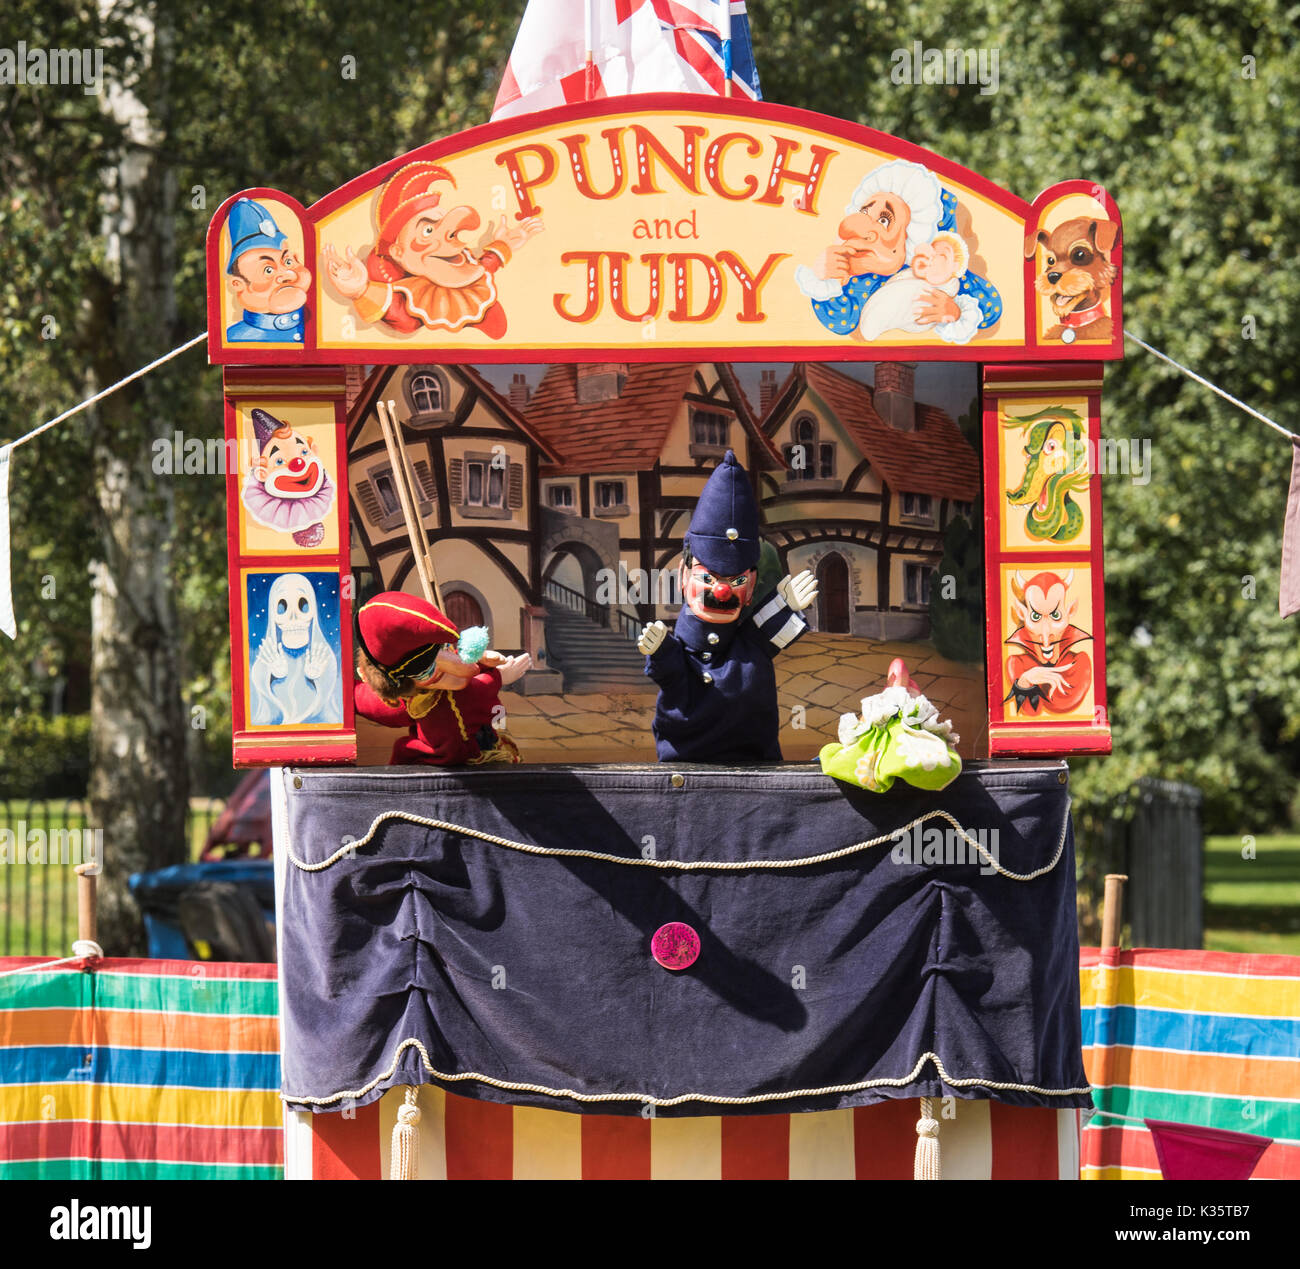 a traditional Punch and Judy show by David Wilde in an English park in the summer at Brentwood, Essex with the Mr Punch and Policeman puppets Stock Photo